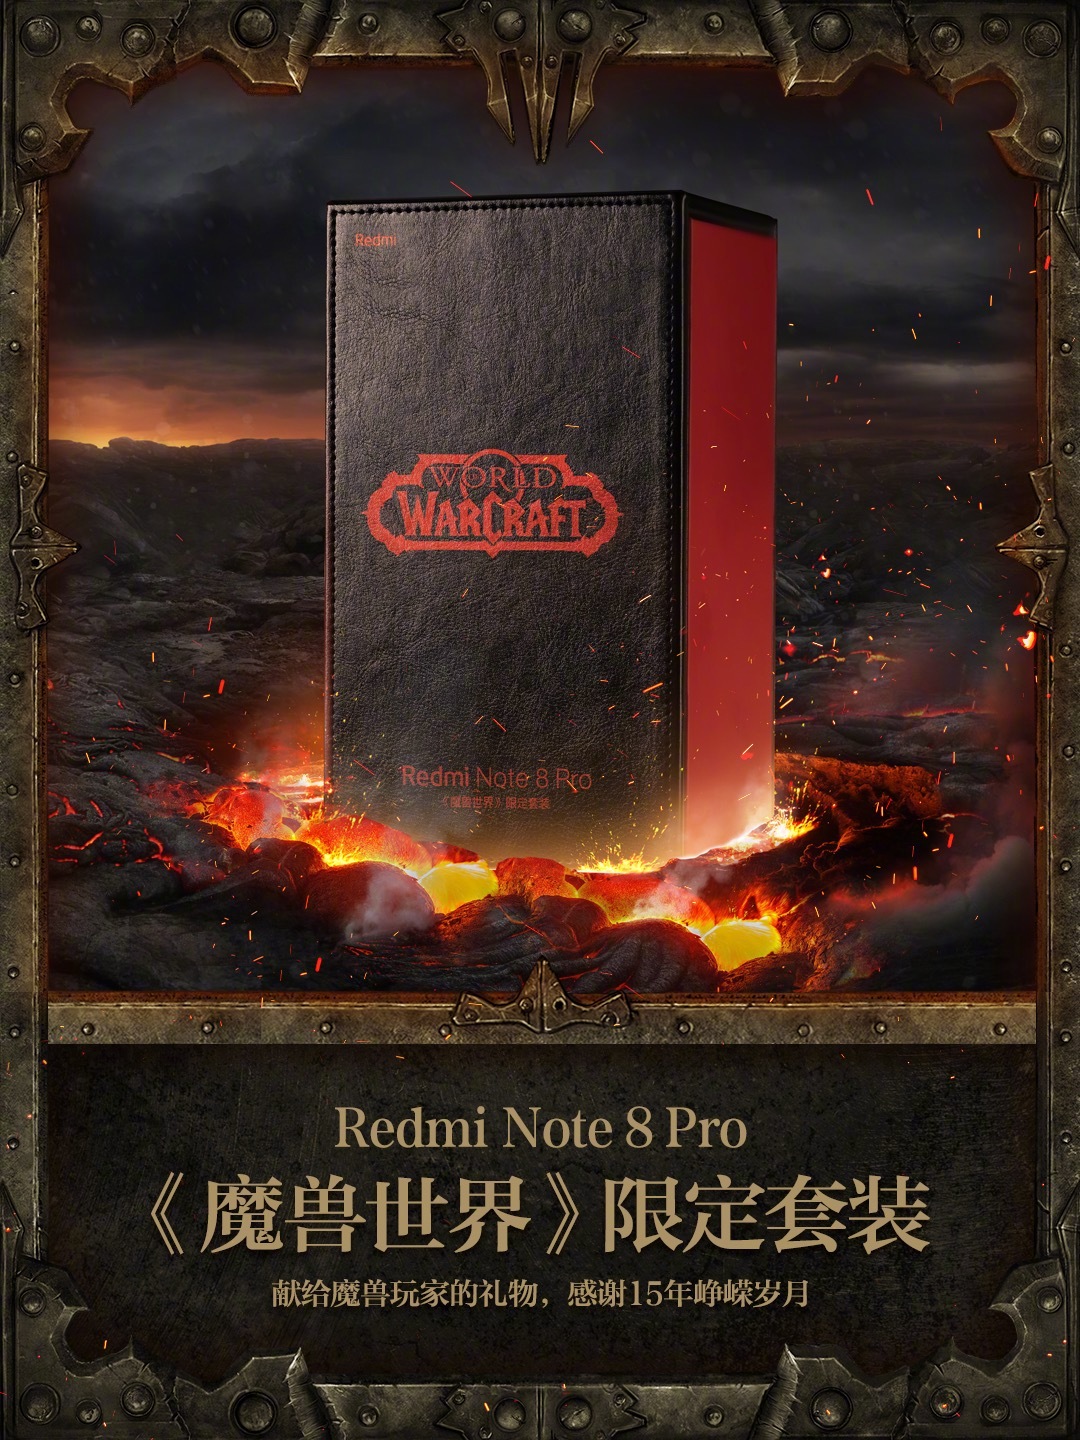 The Redmi Note 8 Pro World of Warcraft edition.